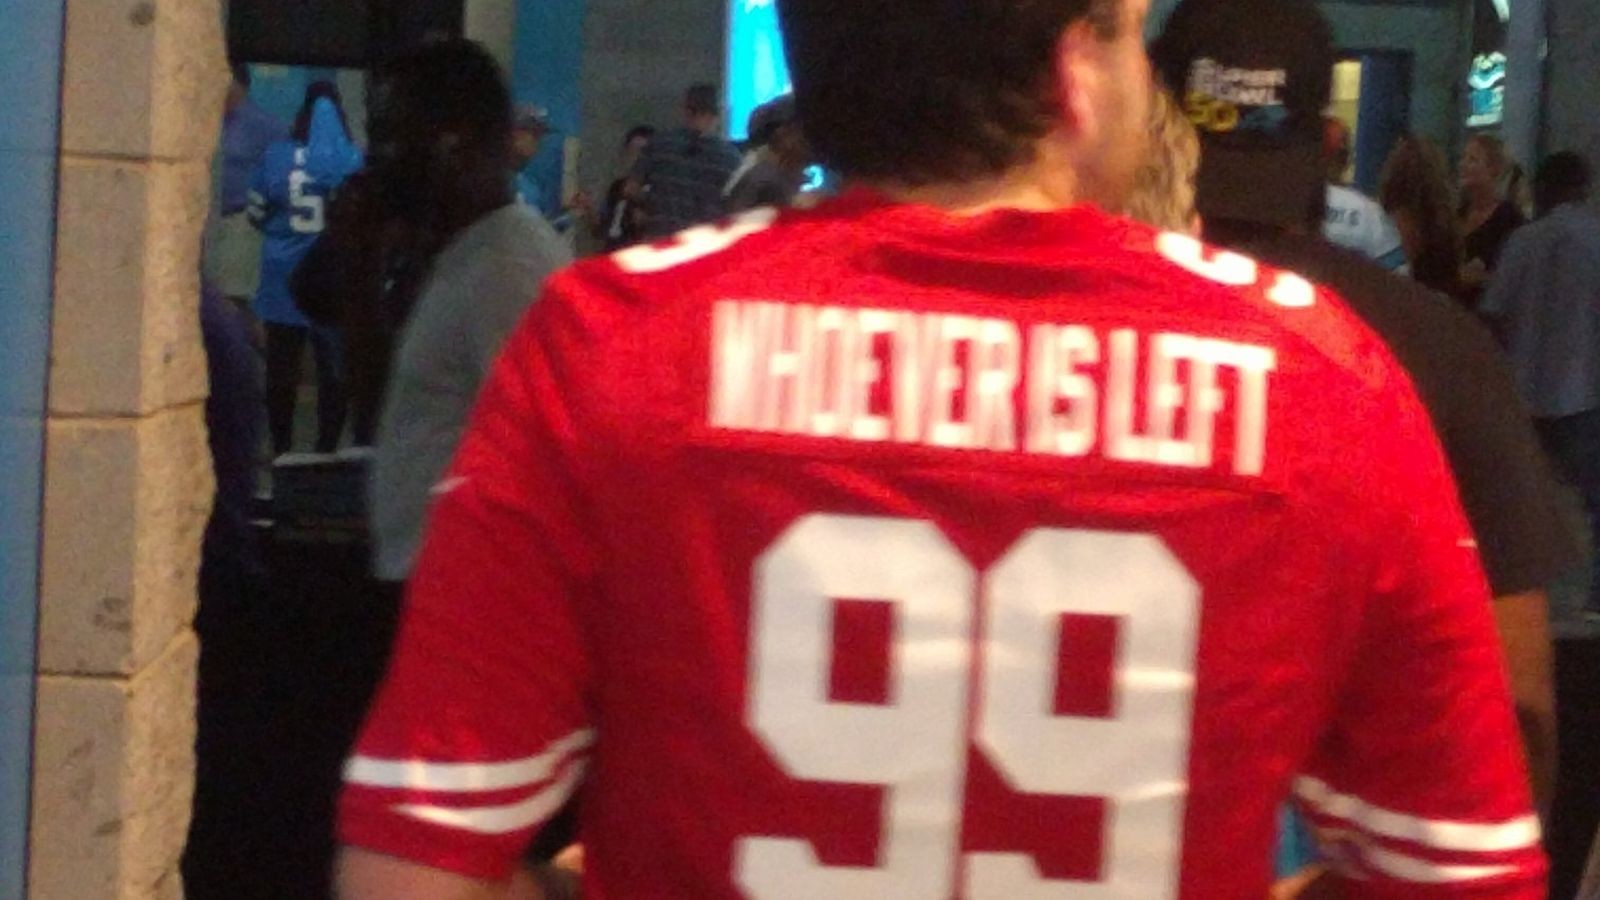 49ers fan sports fantastic customized jersey at Panthers game